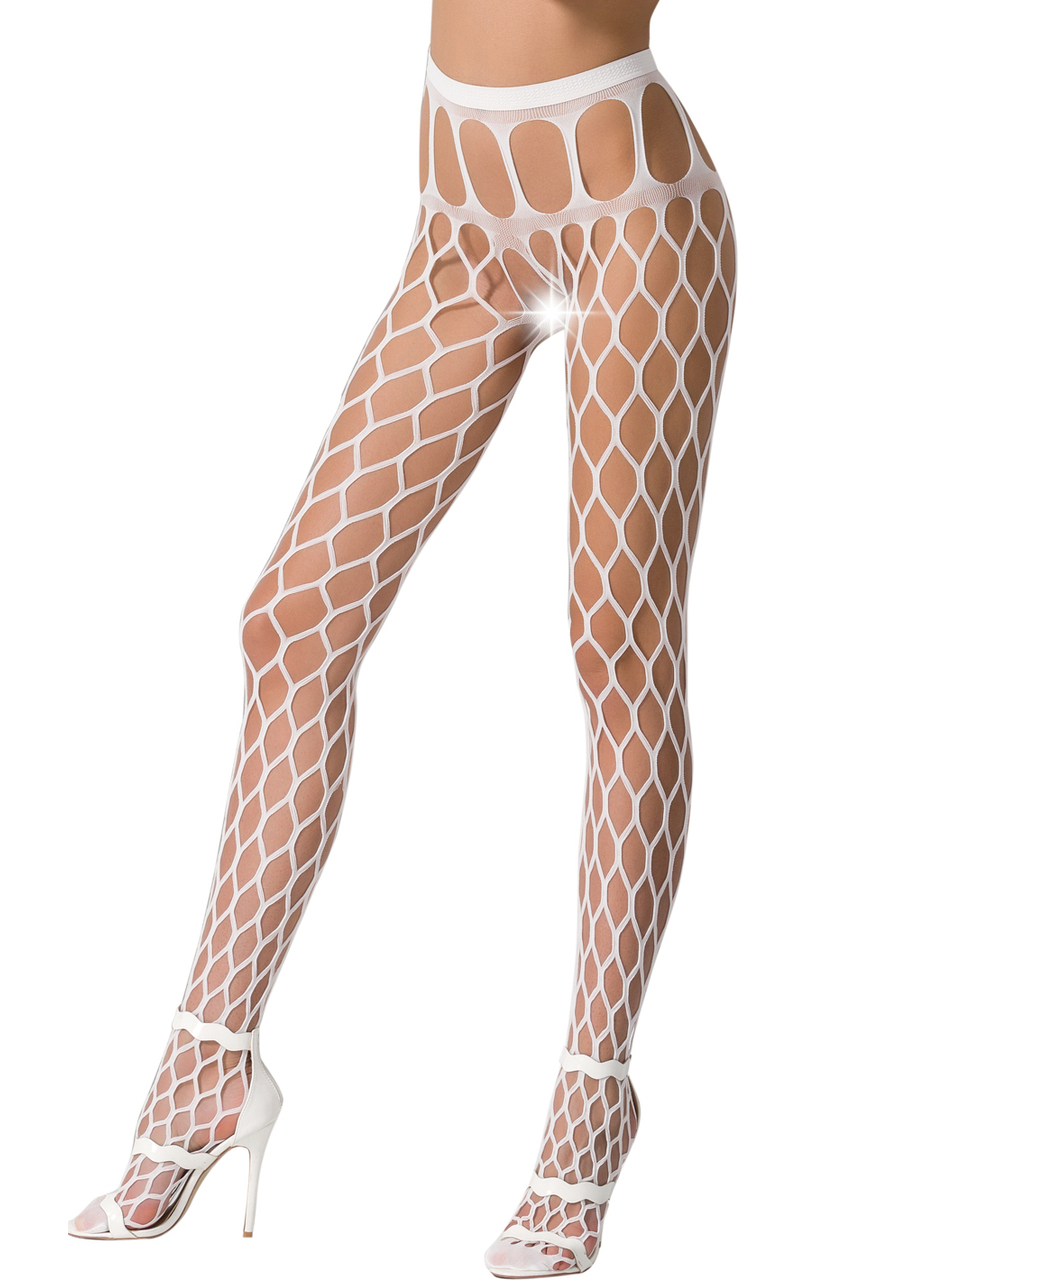 Passion S021 net crotchless tights